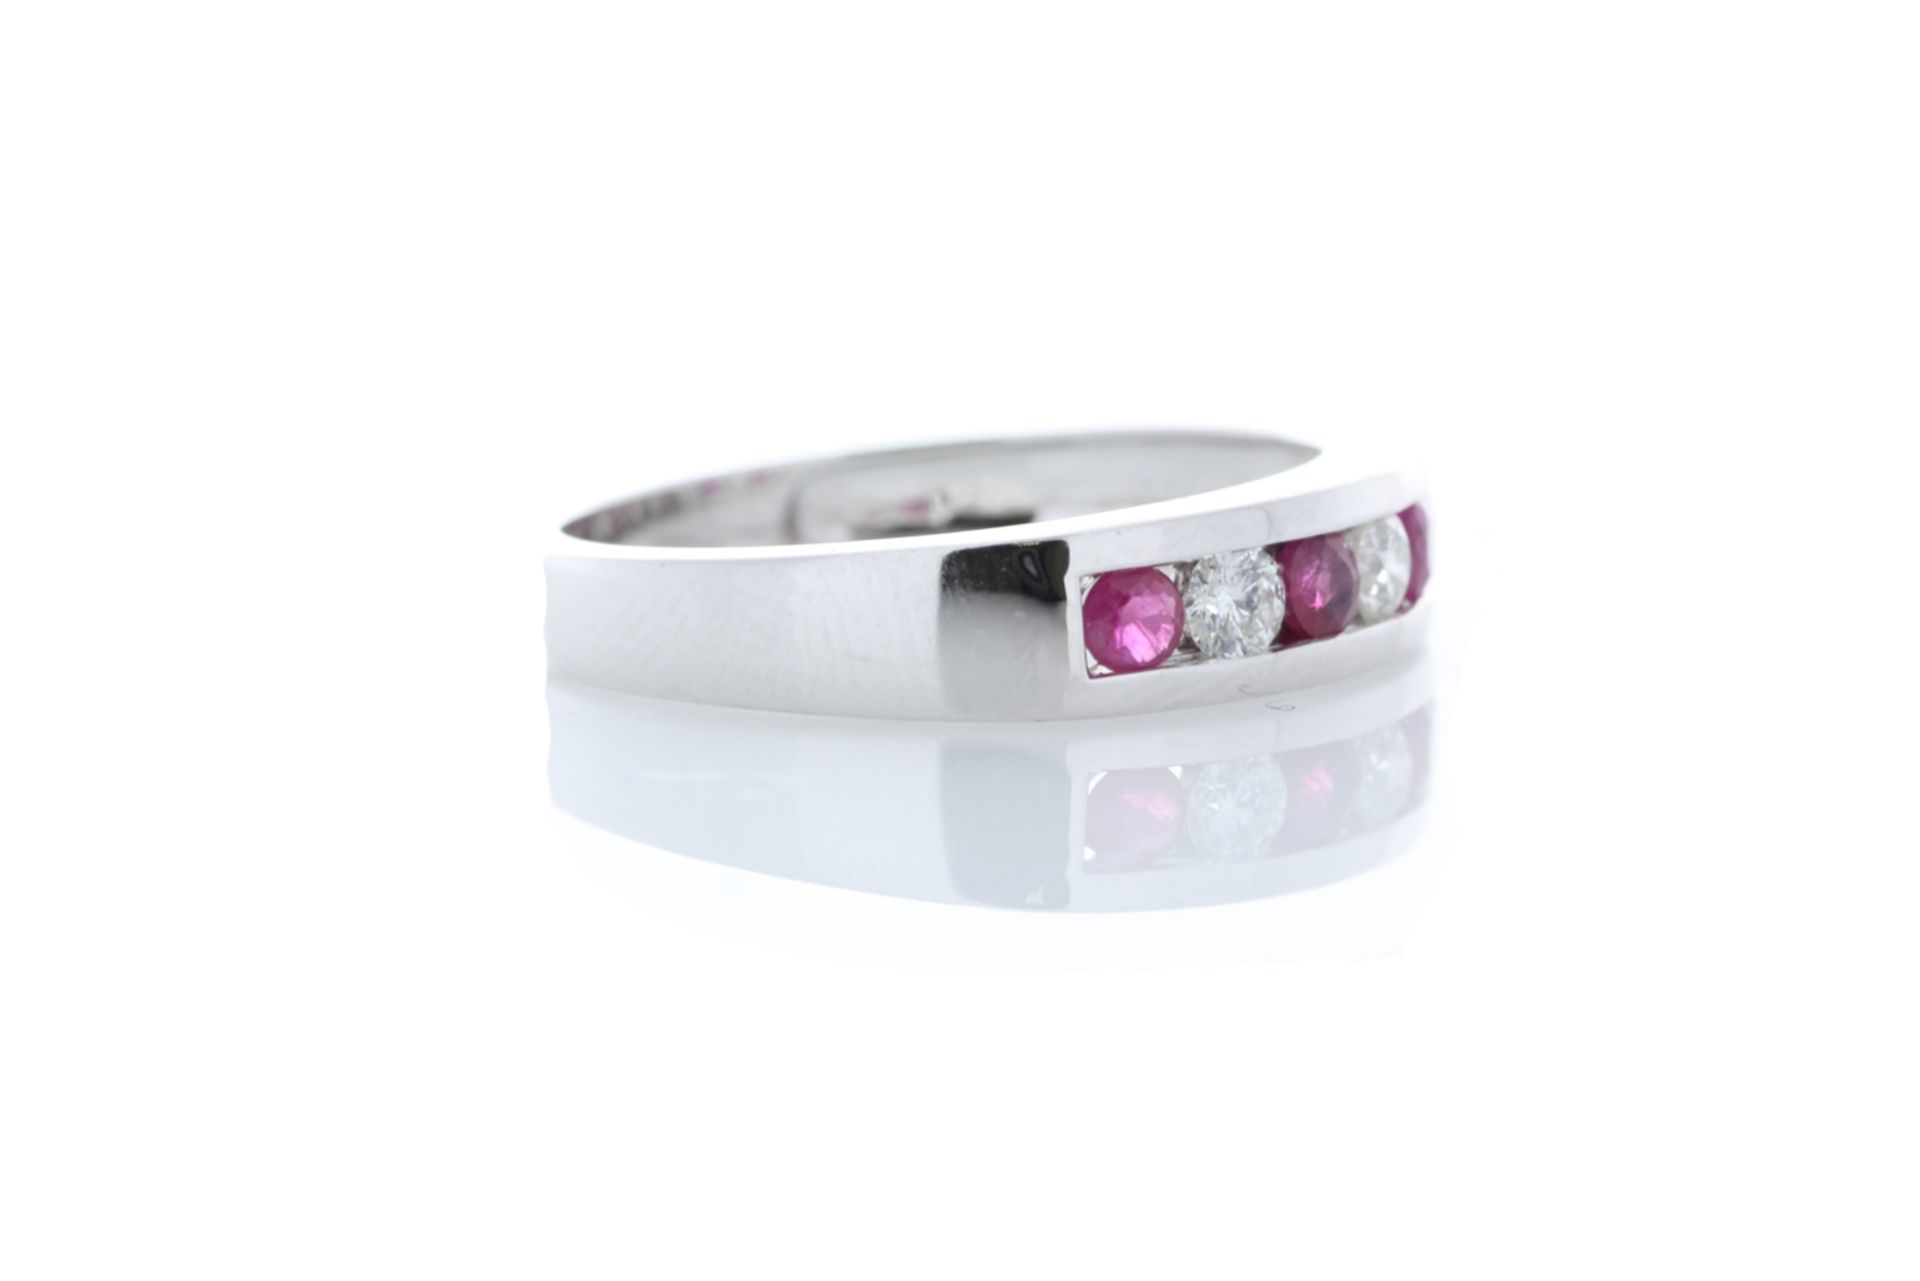 9ct White Gold Channel Set Semi Eternity Diamond And Ruby Ring 0.25 Carats - Valued by GIE £3,020.00 - Image 4 of 5